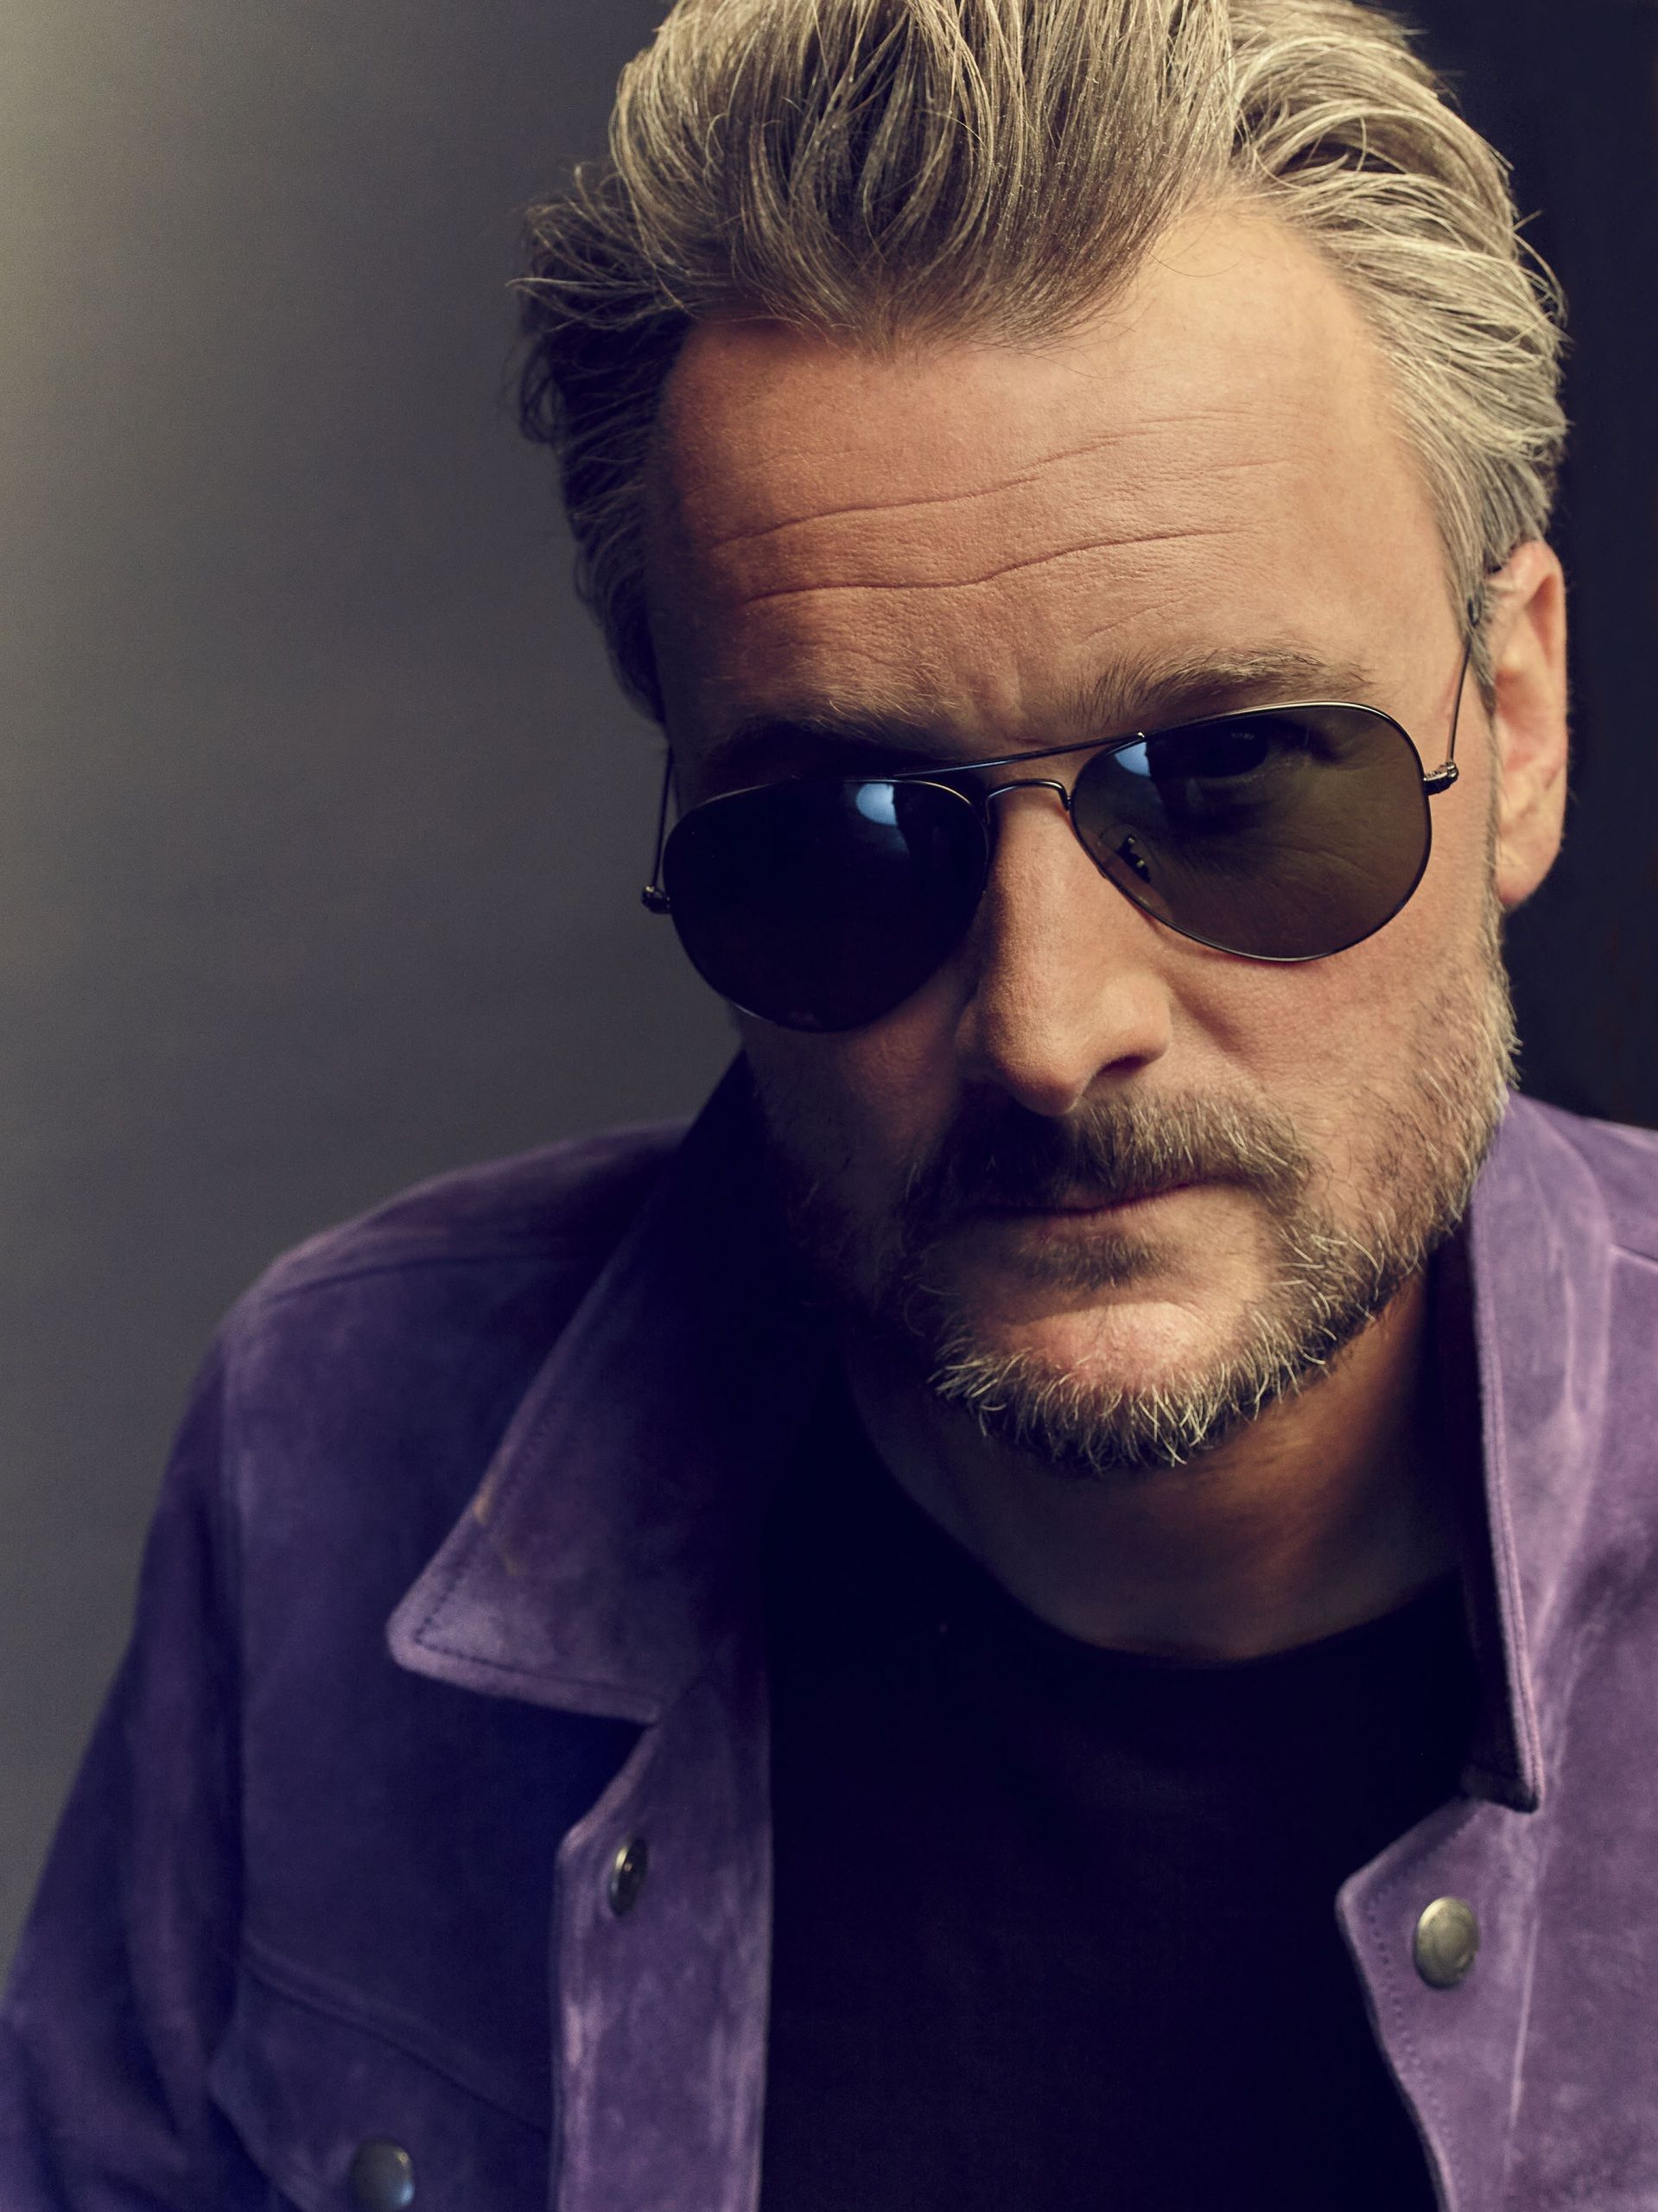 ERIC CHURCH’S THE GATHER AGAIN TOUR NAMED BILLBOARD MUSIC AWARDS’ TOP COUNTRY TOUR